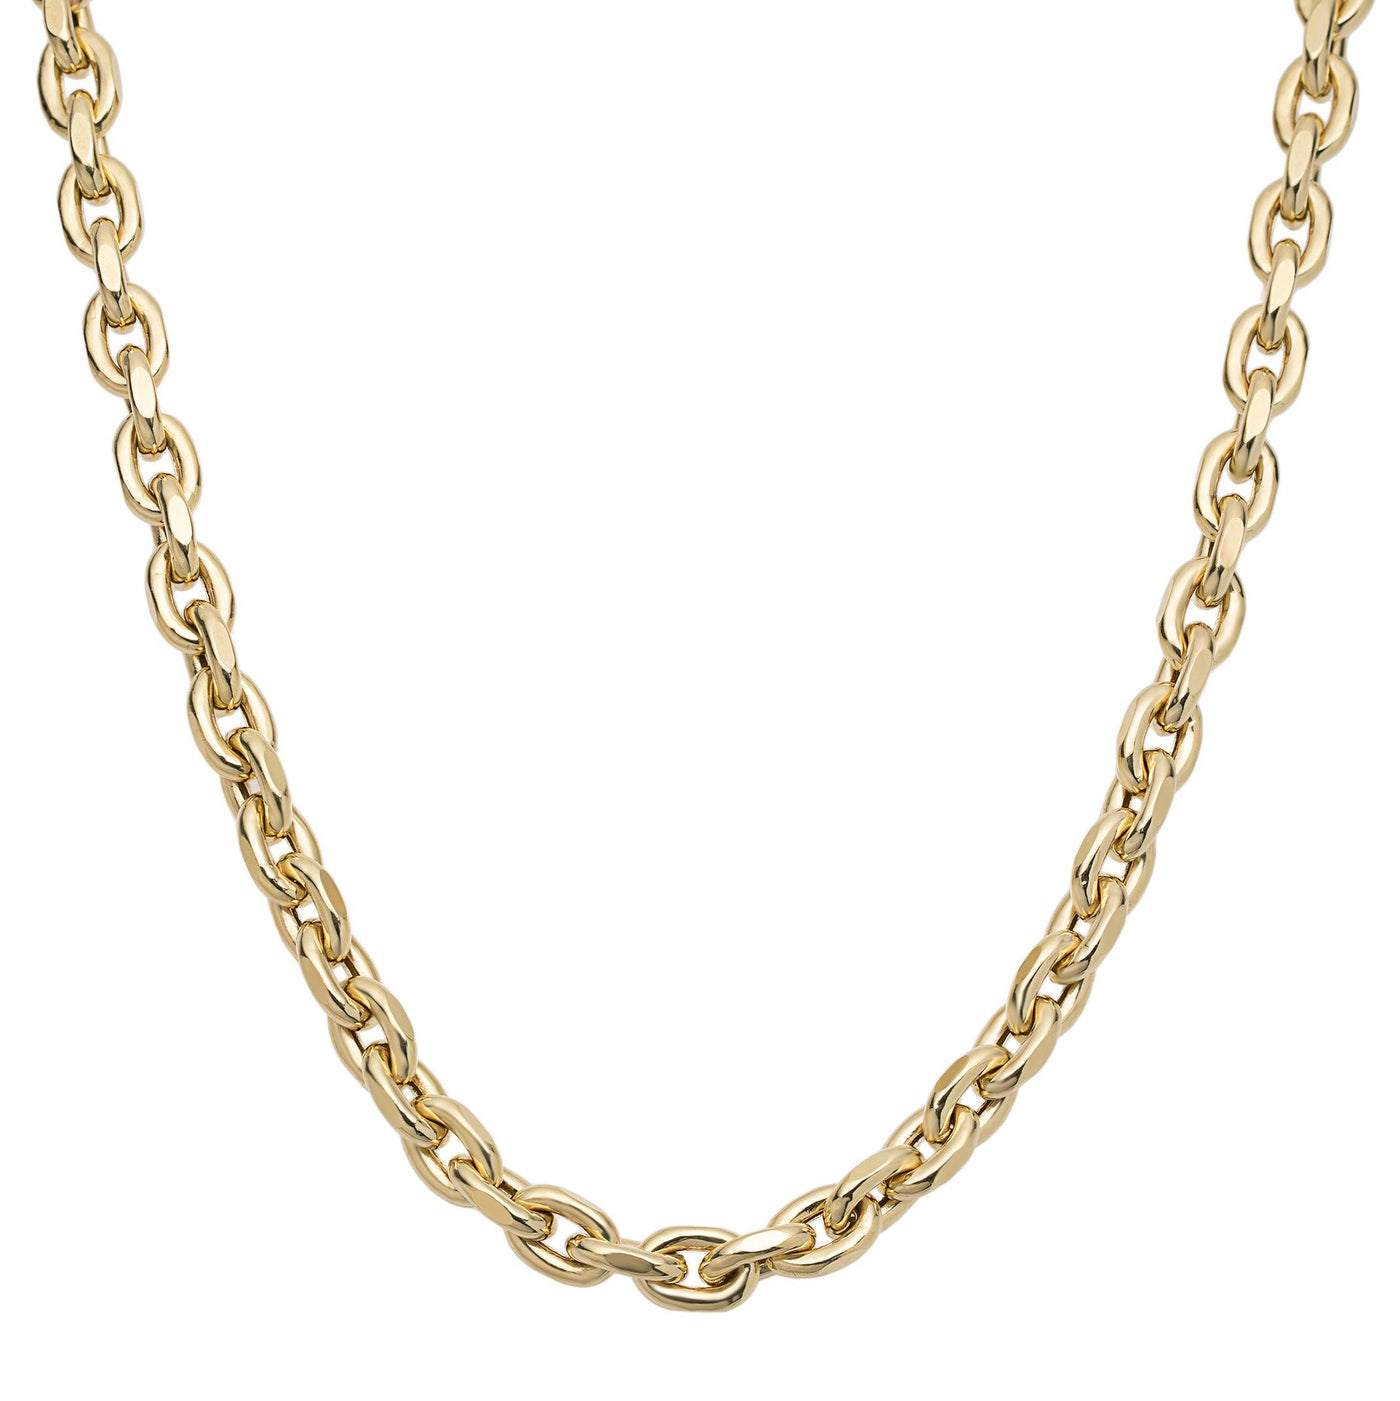 Oval Rolo Link Chain Necklace 14K Gold - bayamjewelry